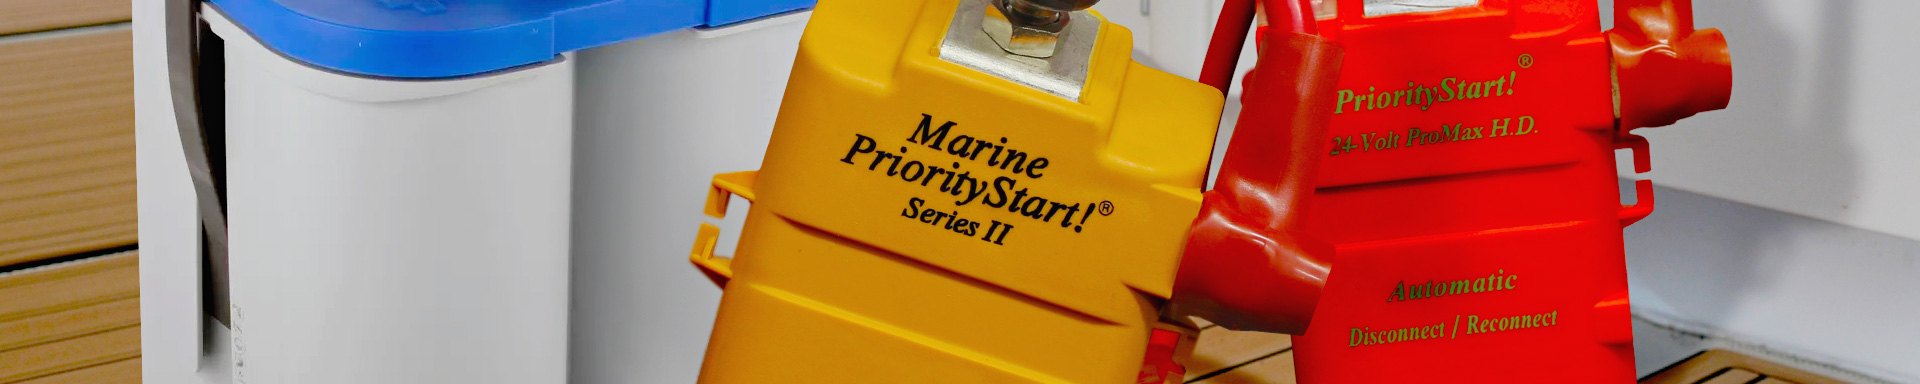 PriorityStart Battery Chargers & Jump Starters